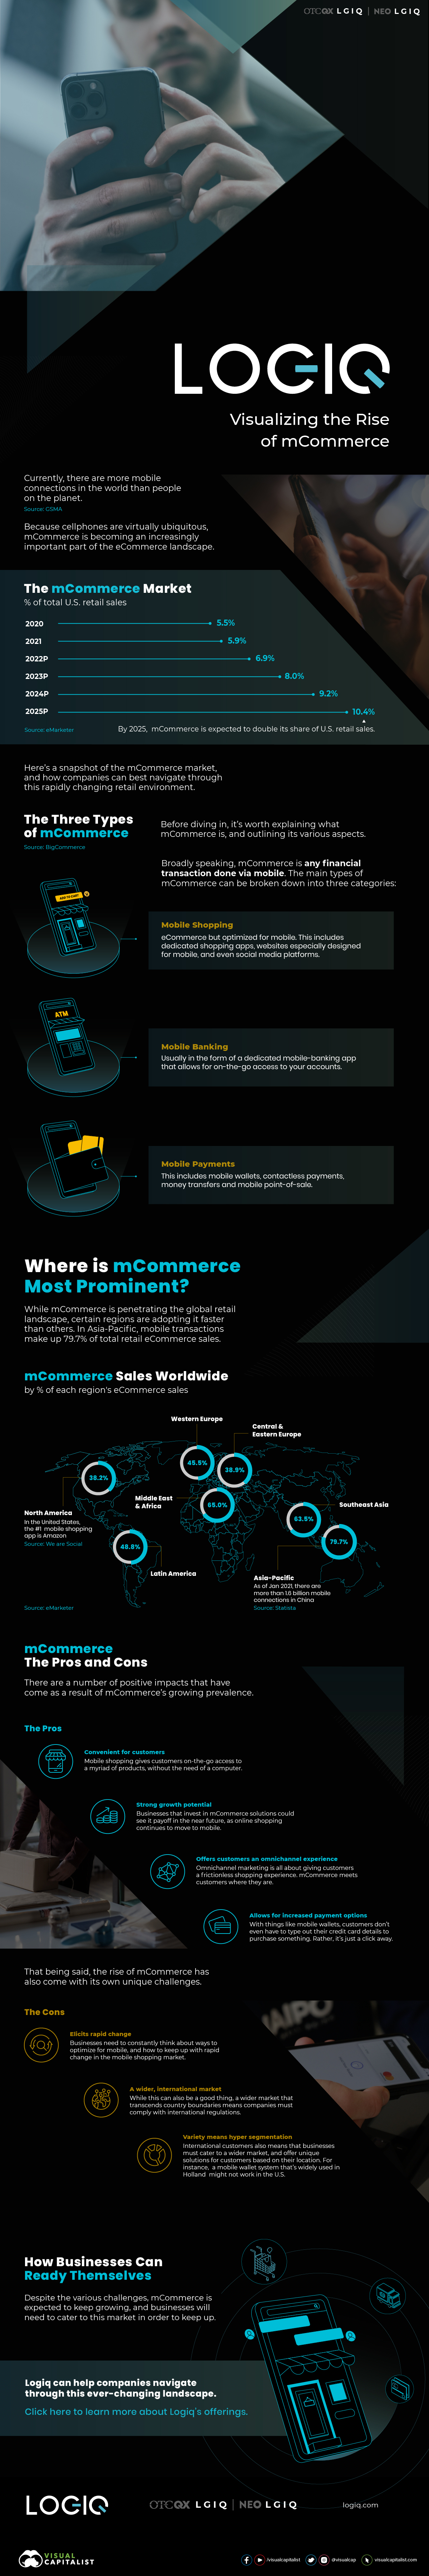 The rise of mCommerce